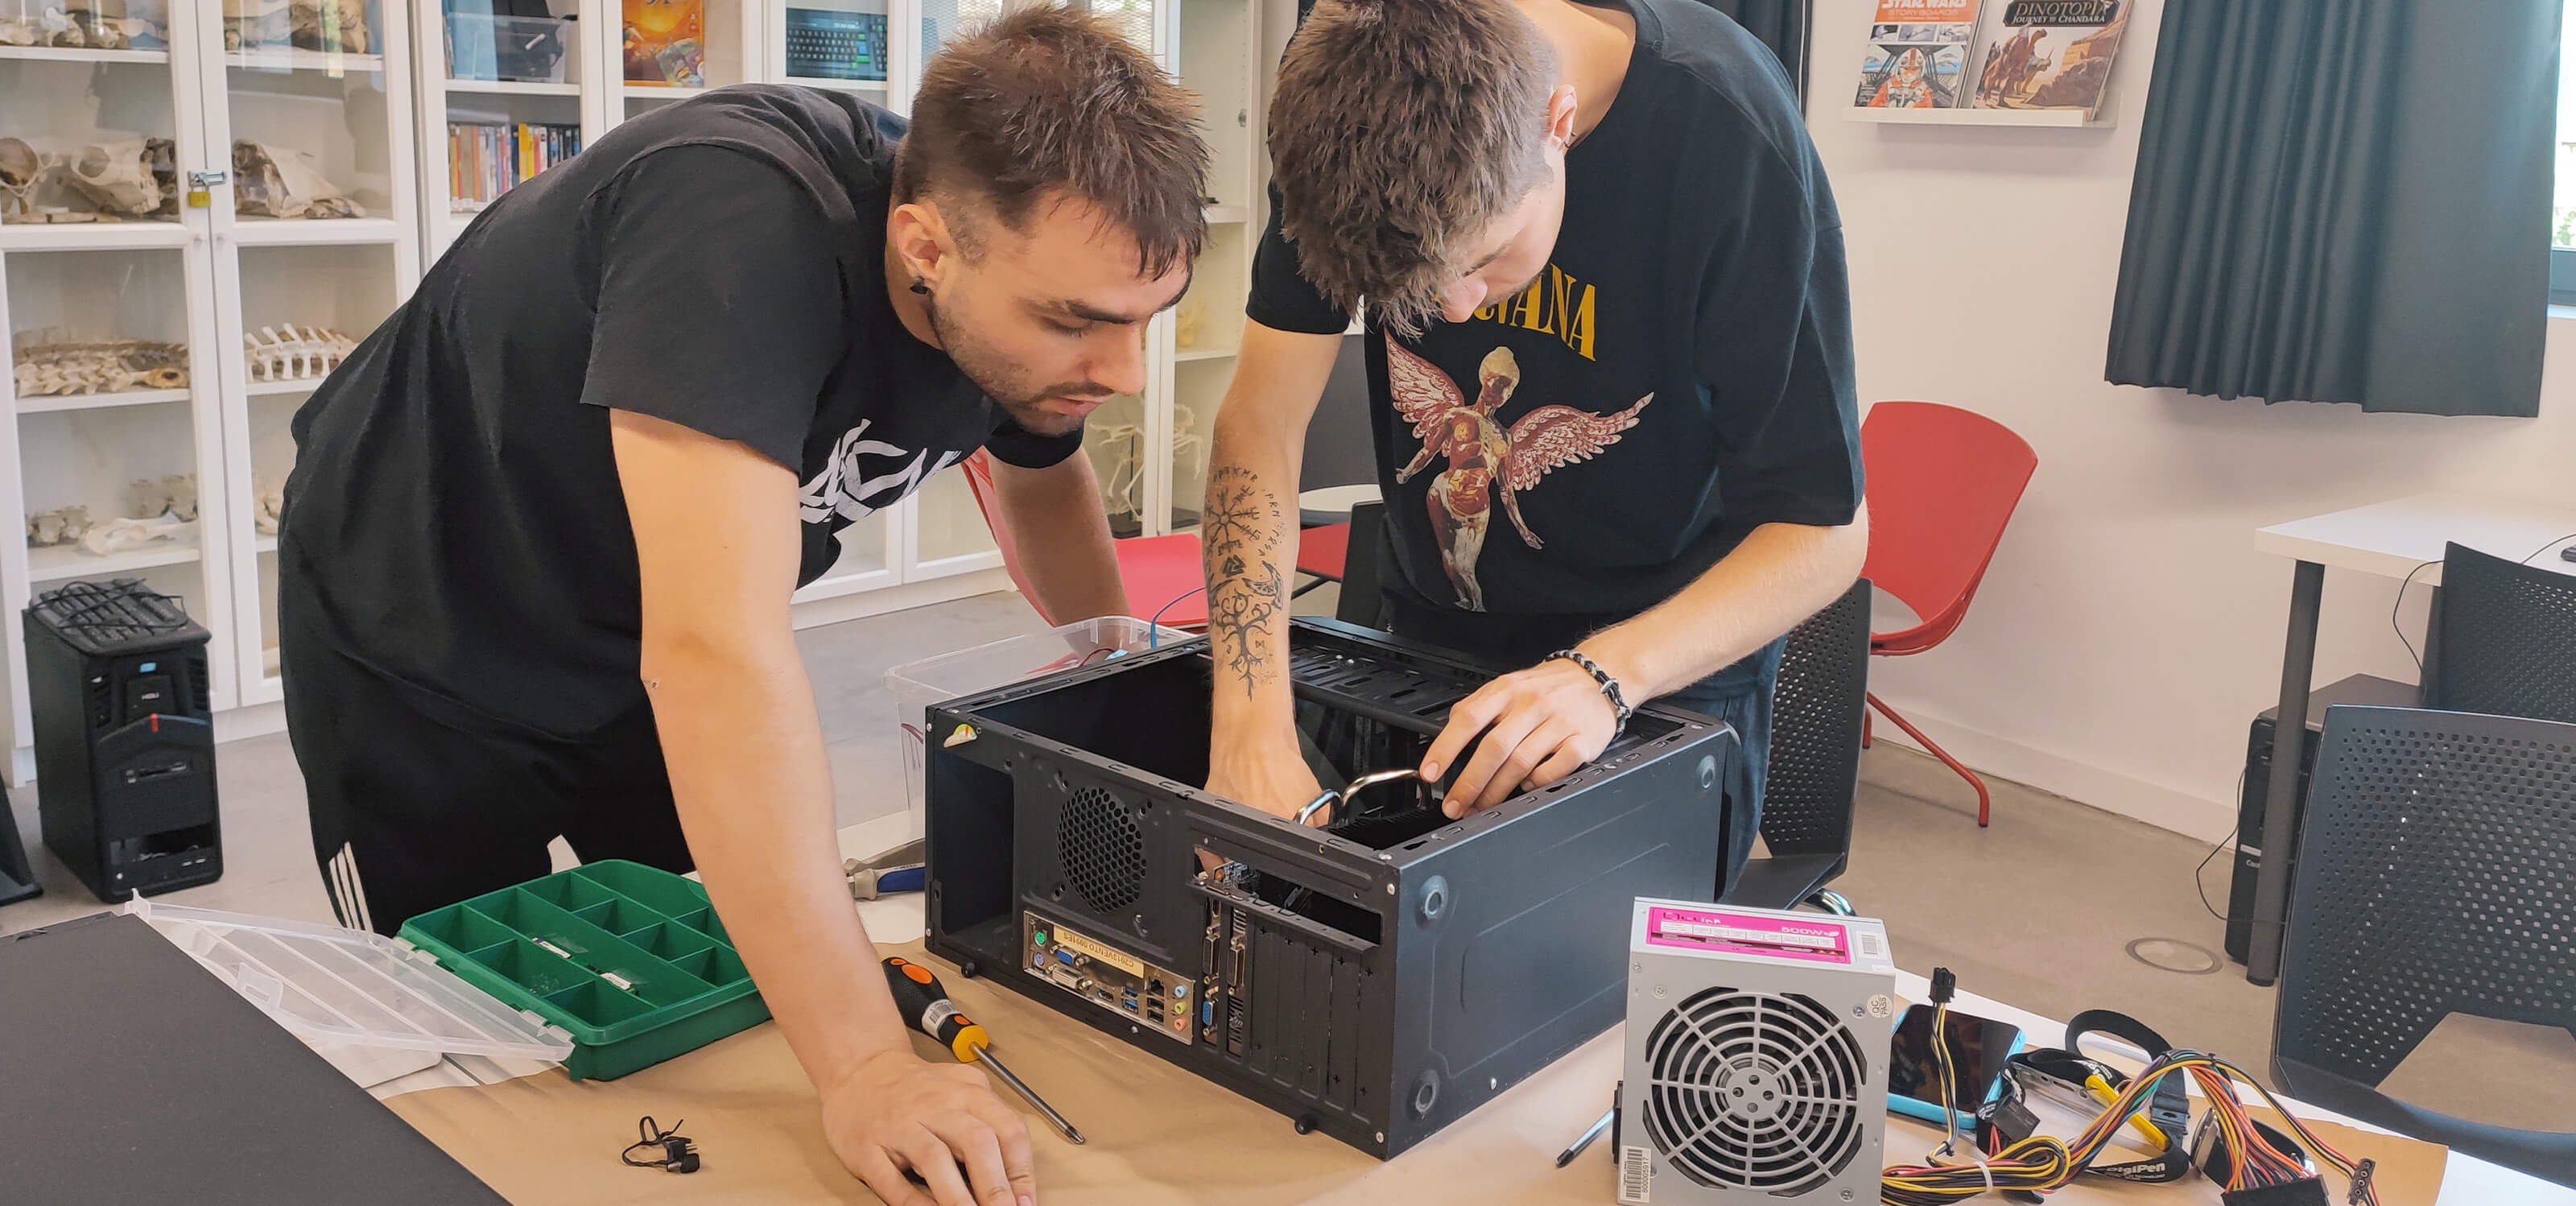 Two students work together to build a PC.